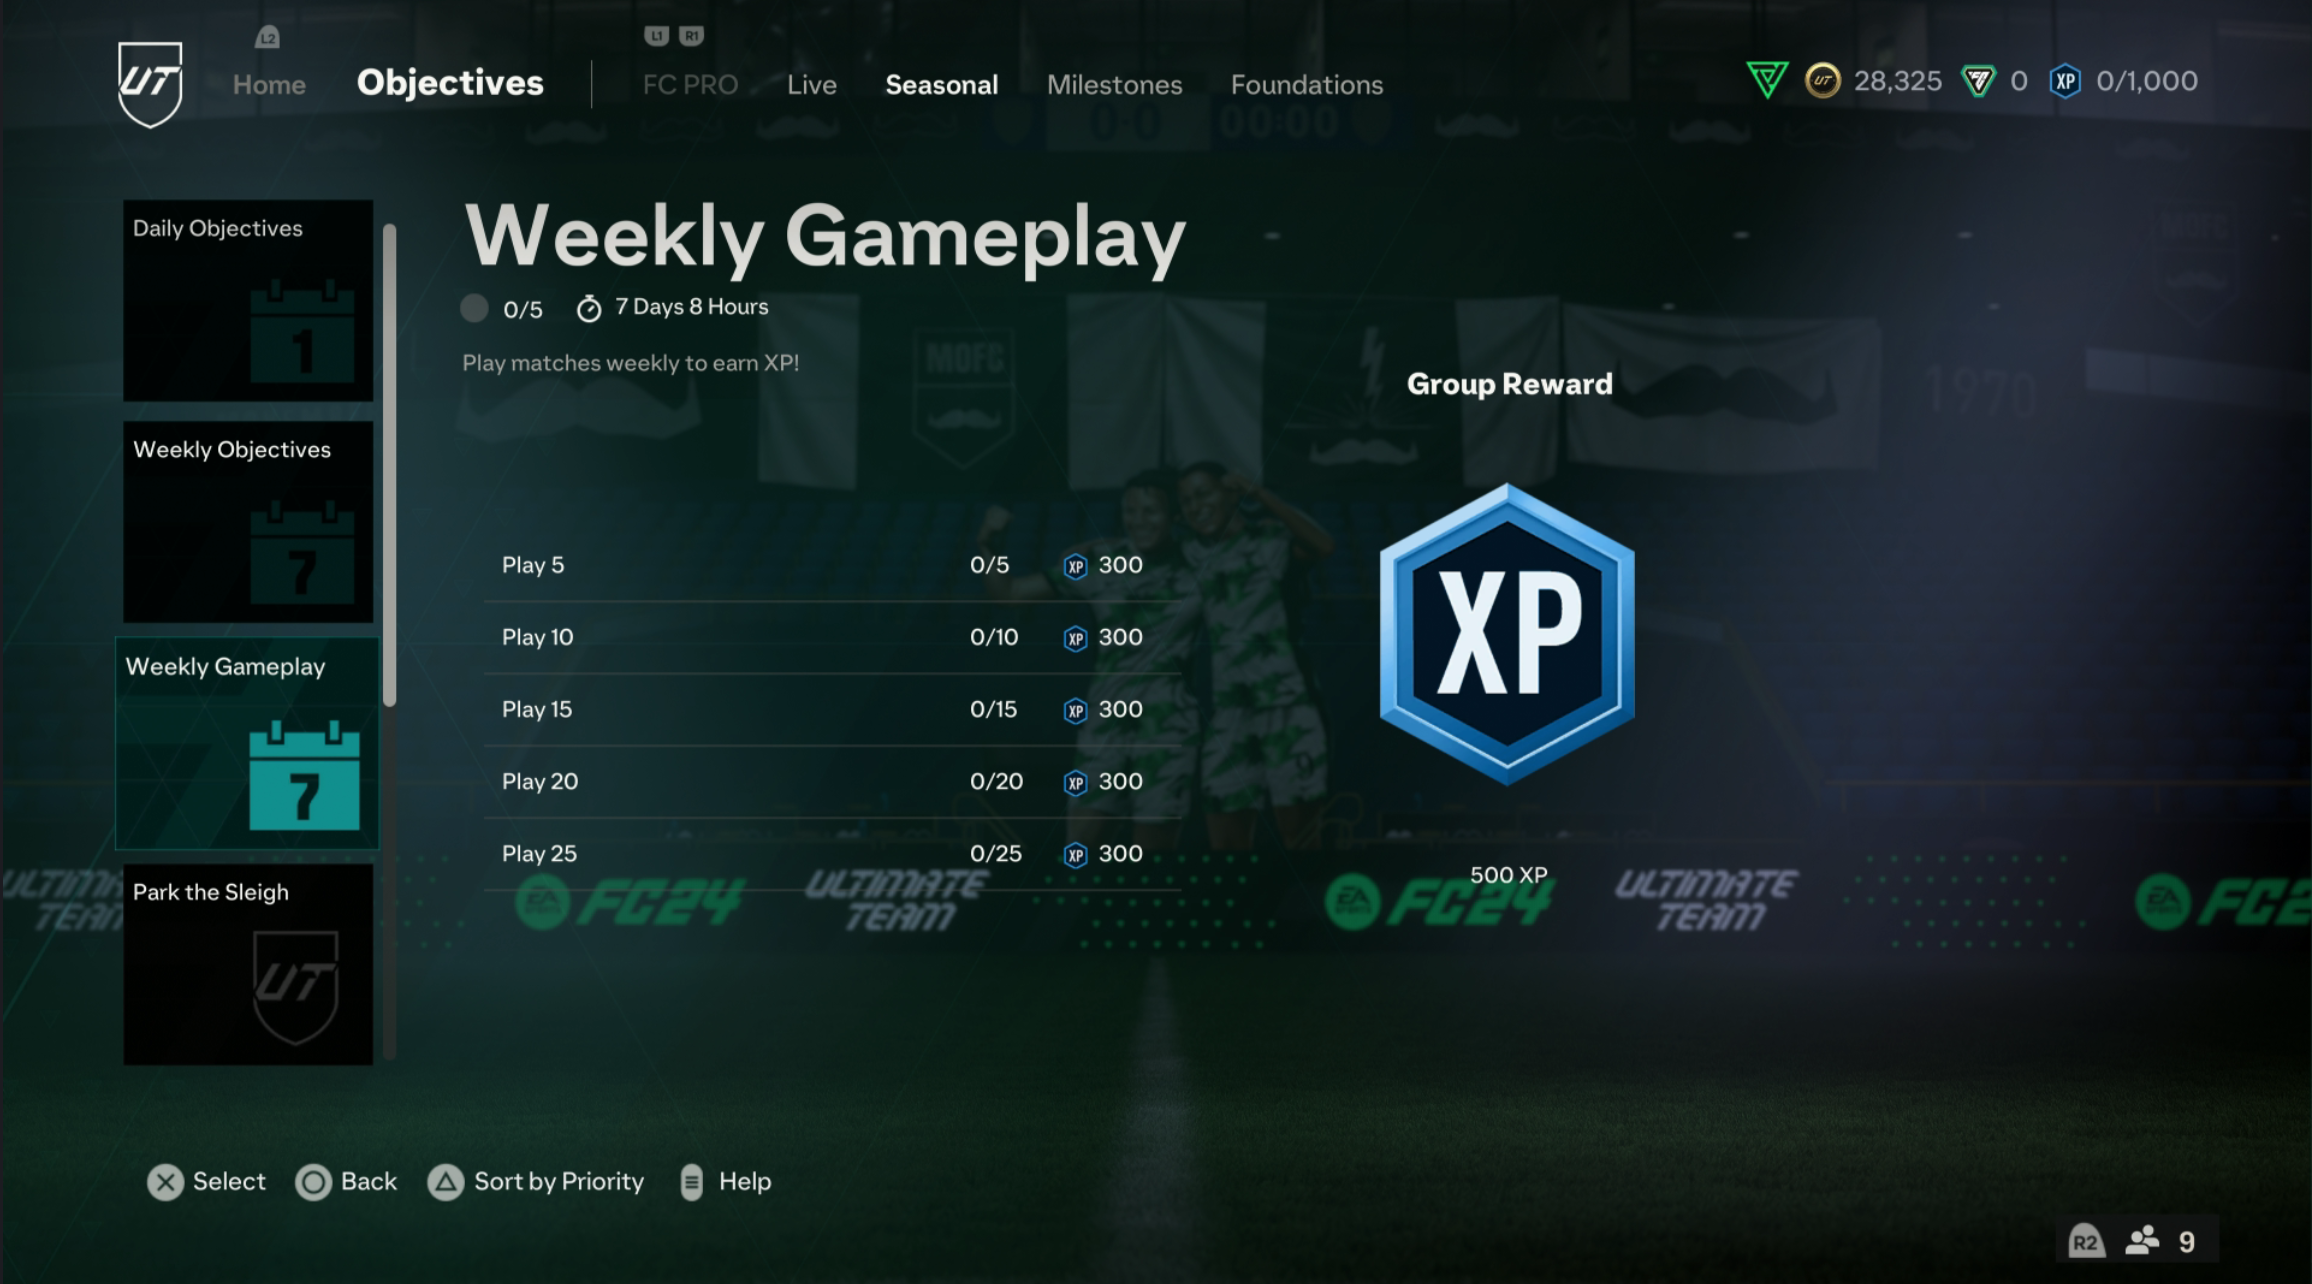 Weekly Gameplay Objectives